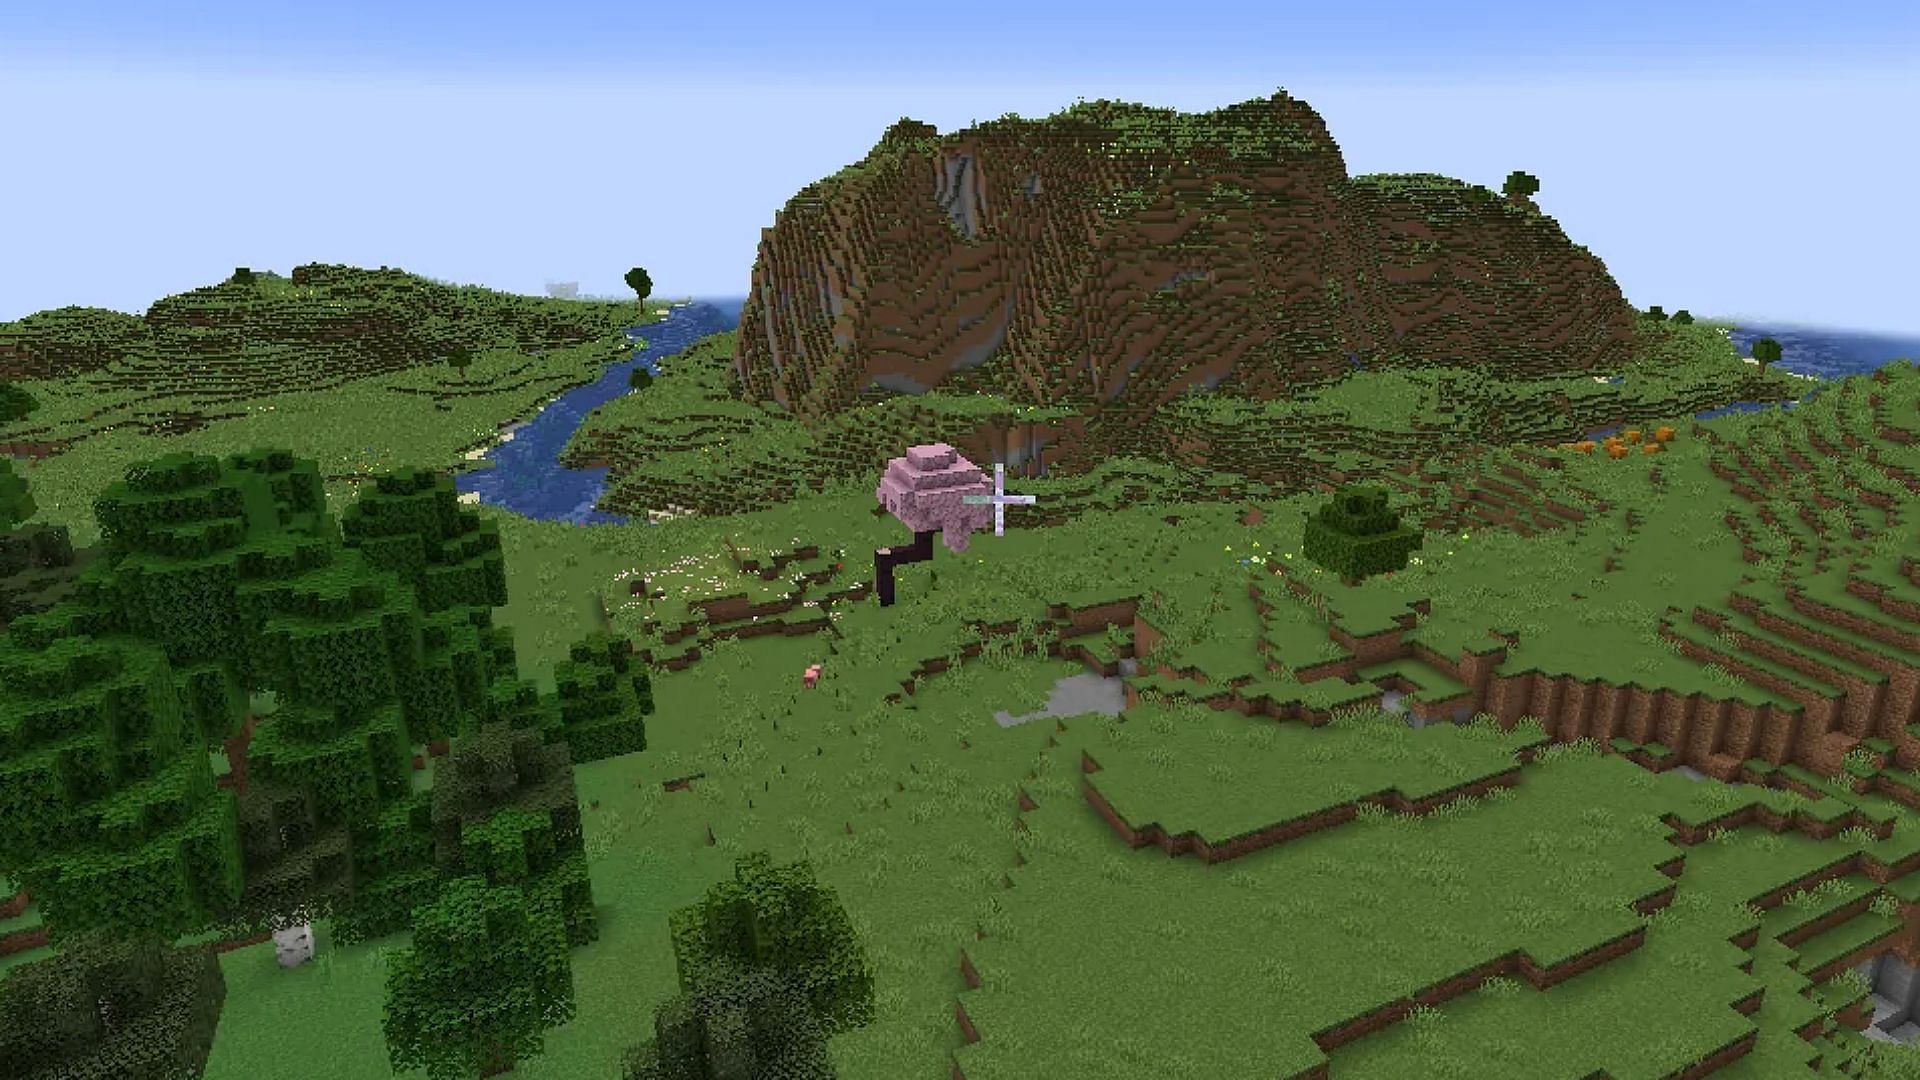 Minecraft player finds one of the smallest Cherry Grove biome (Image via Reddit/u/FrenkySS)